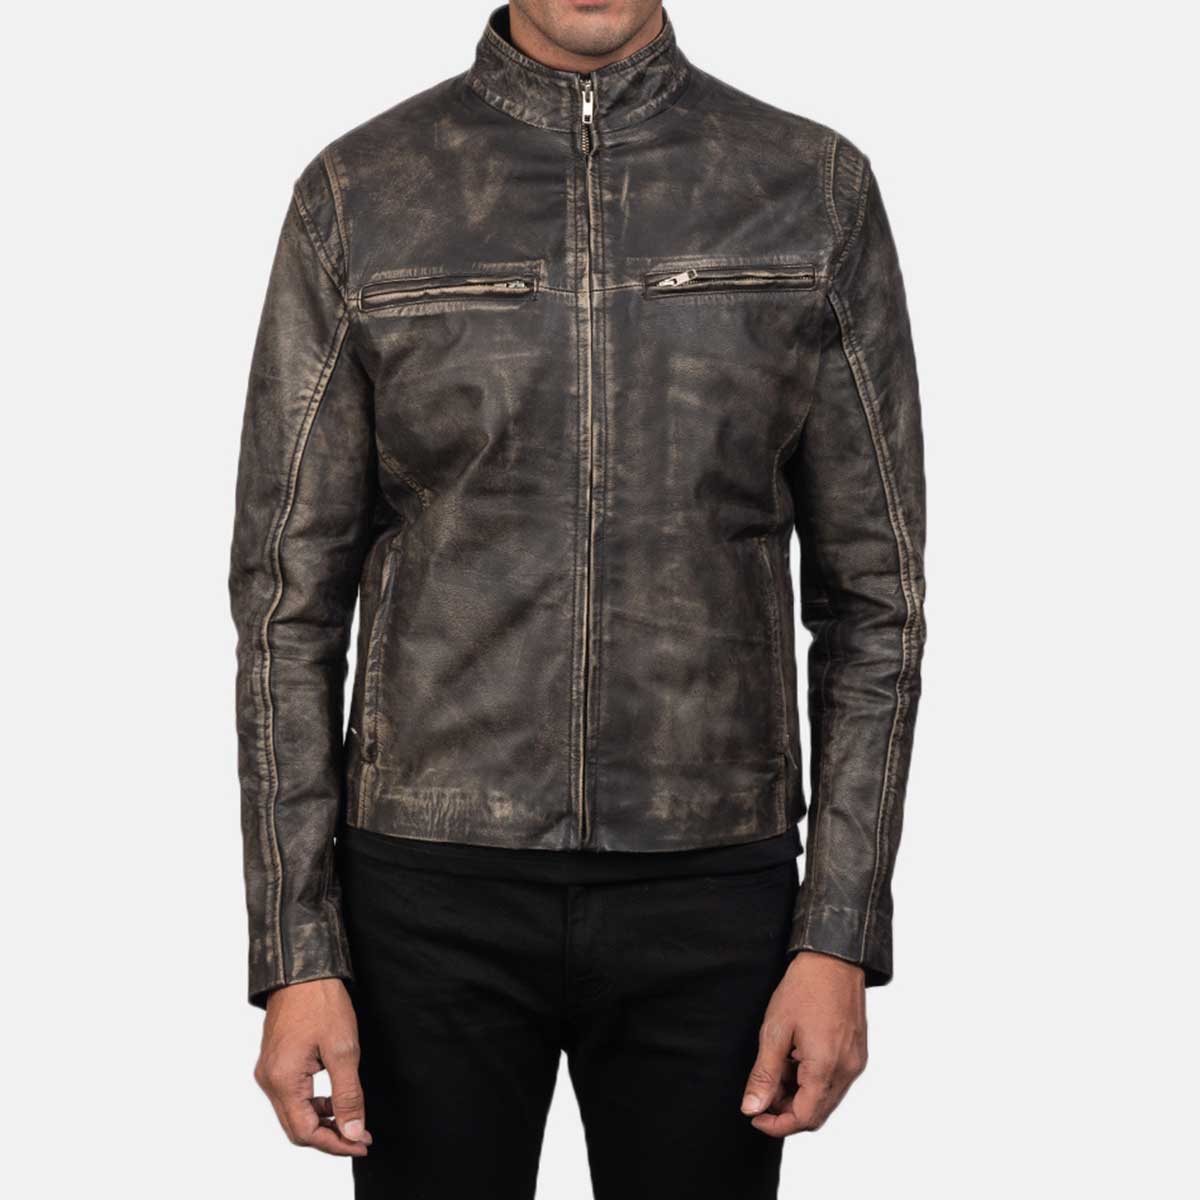 Ionic Brown Distressed Leather Biker Jacket - The Vintage Leather